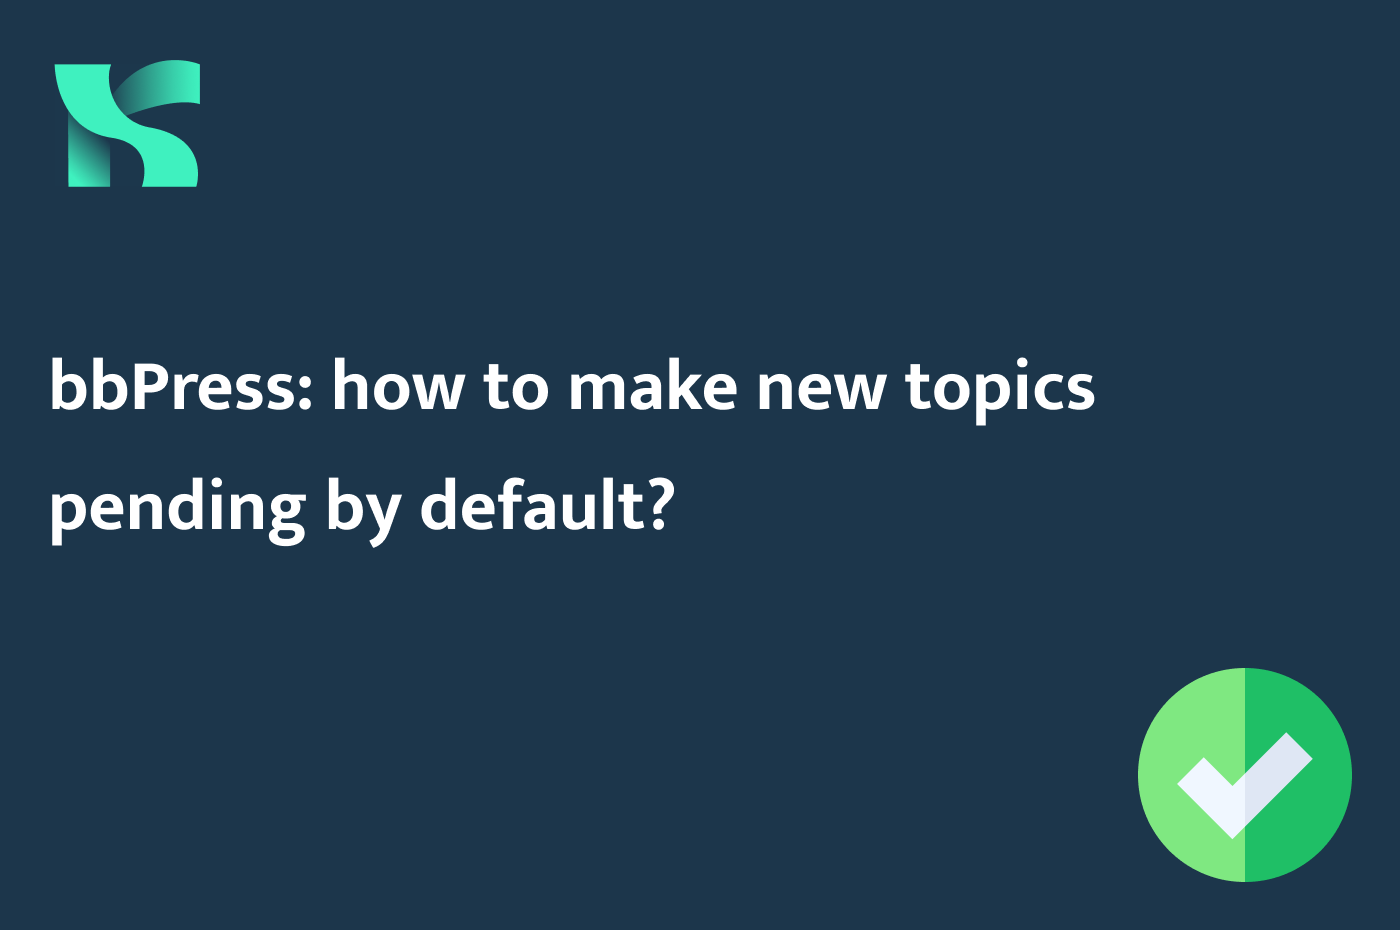 bbPress: how to make new topics pending by default?